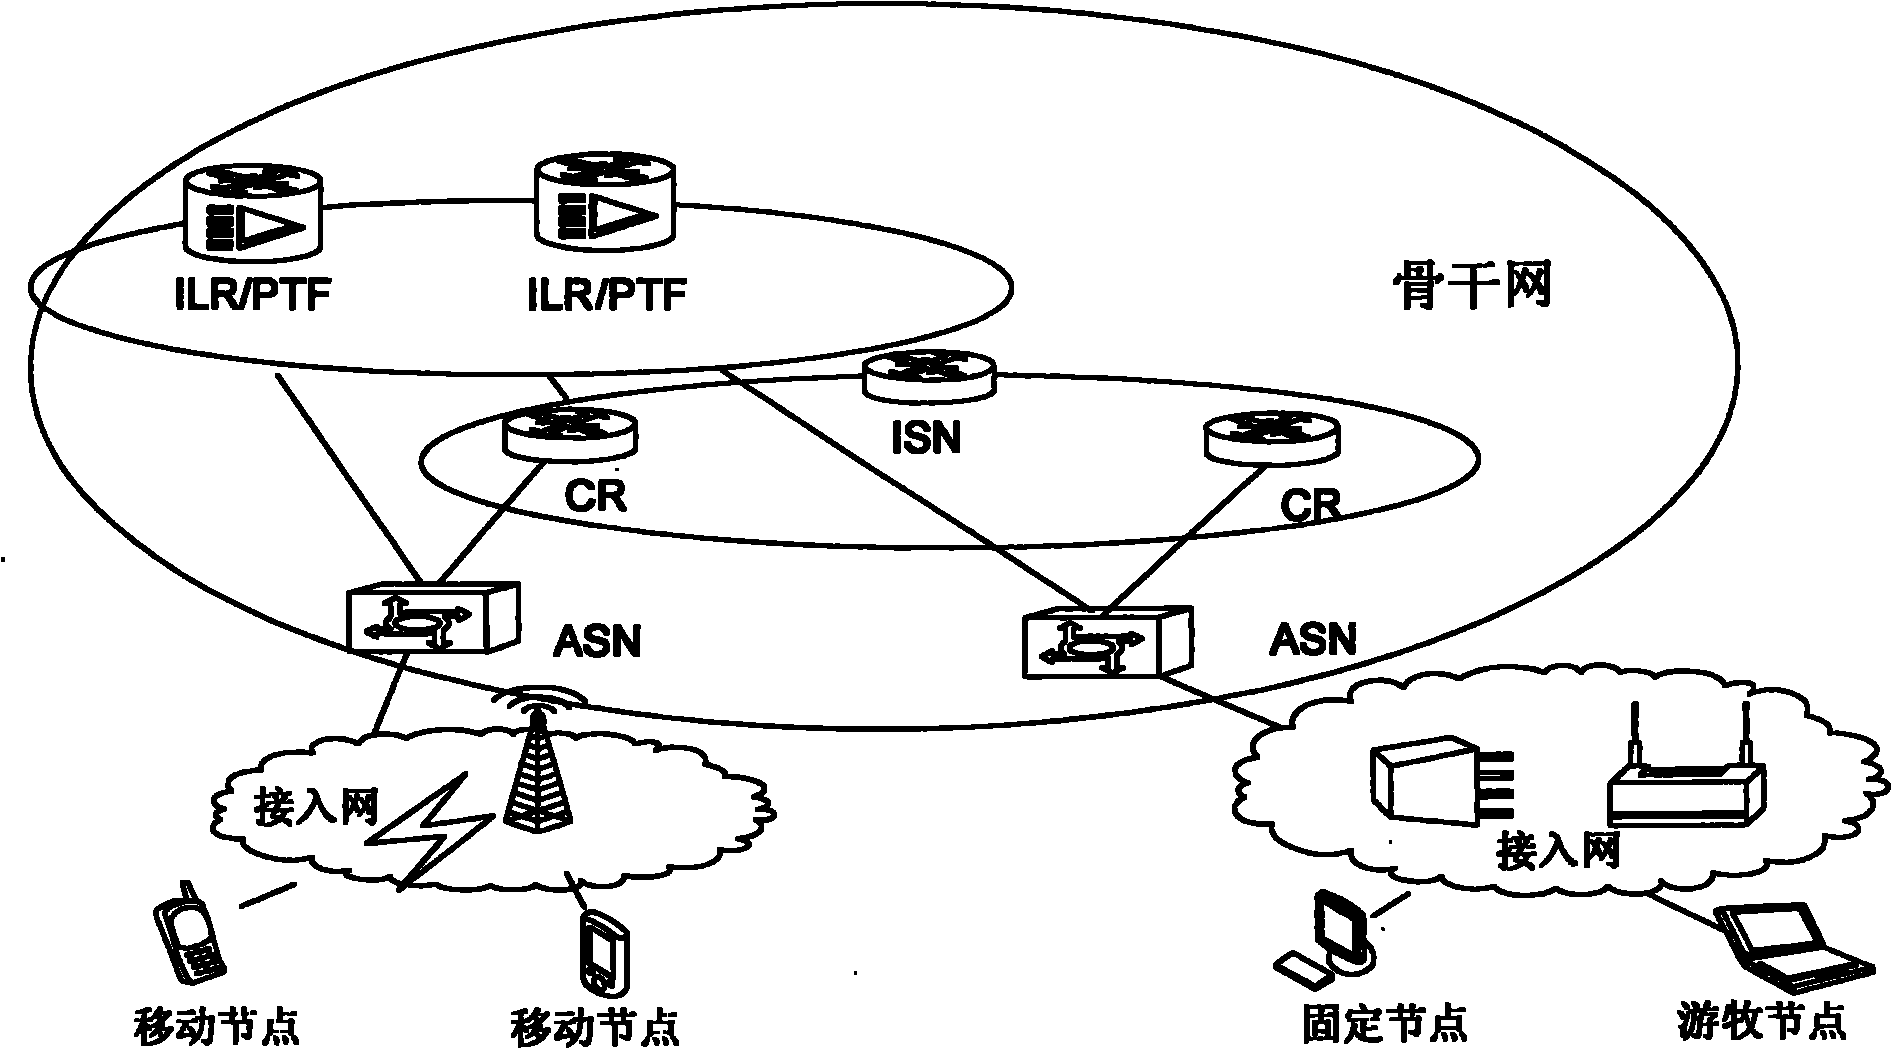 Communication network realized by network architecture based on separation of control surfaces and media surface